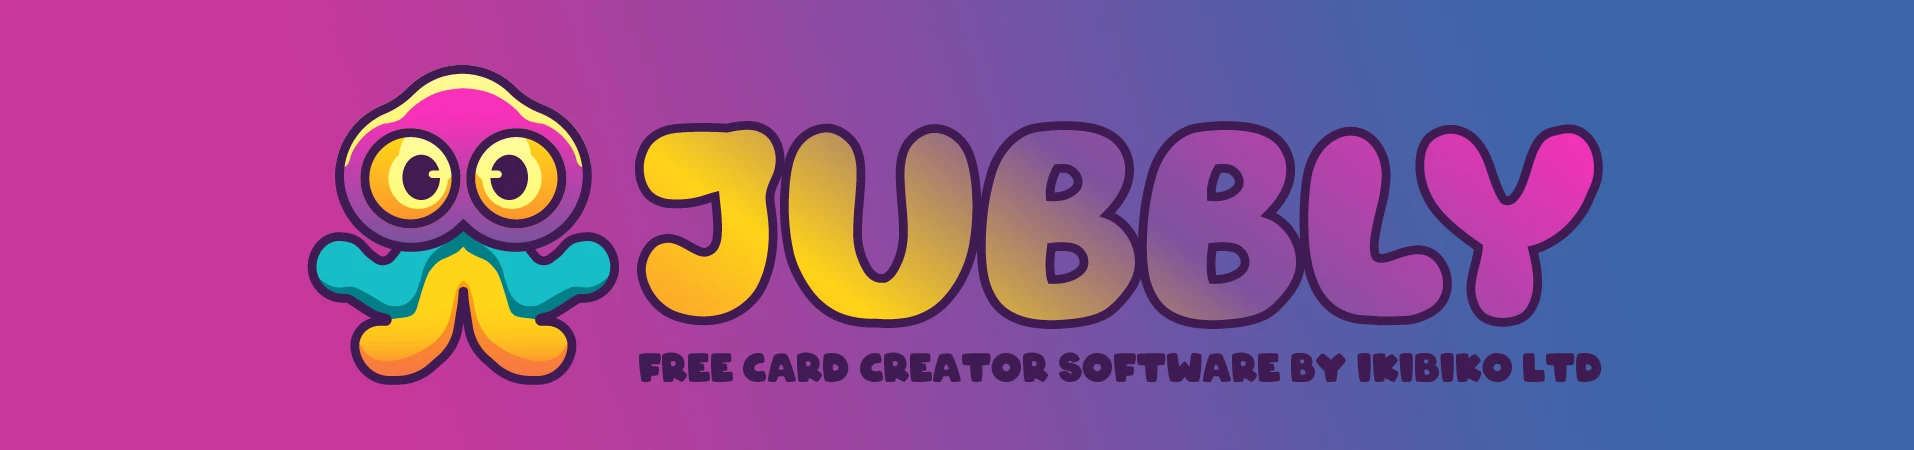 Free Card Creator Software – HTML, CSS & JS Based